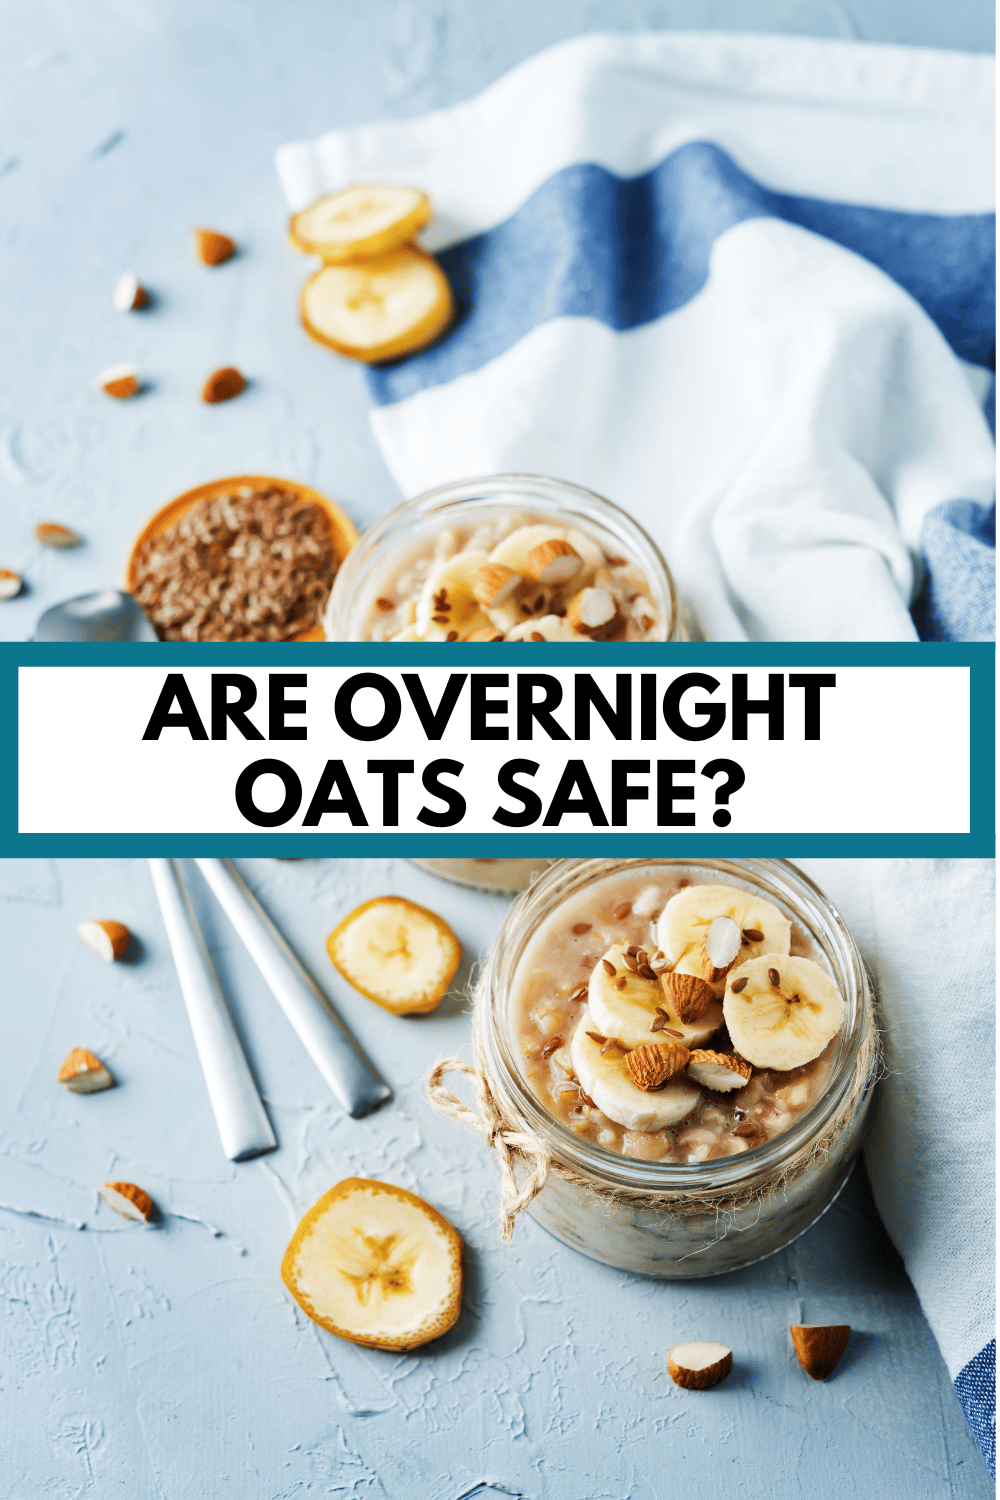 jars of banana almond overnight oats with text overlay, "are overnight oats safe?"